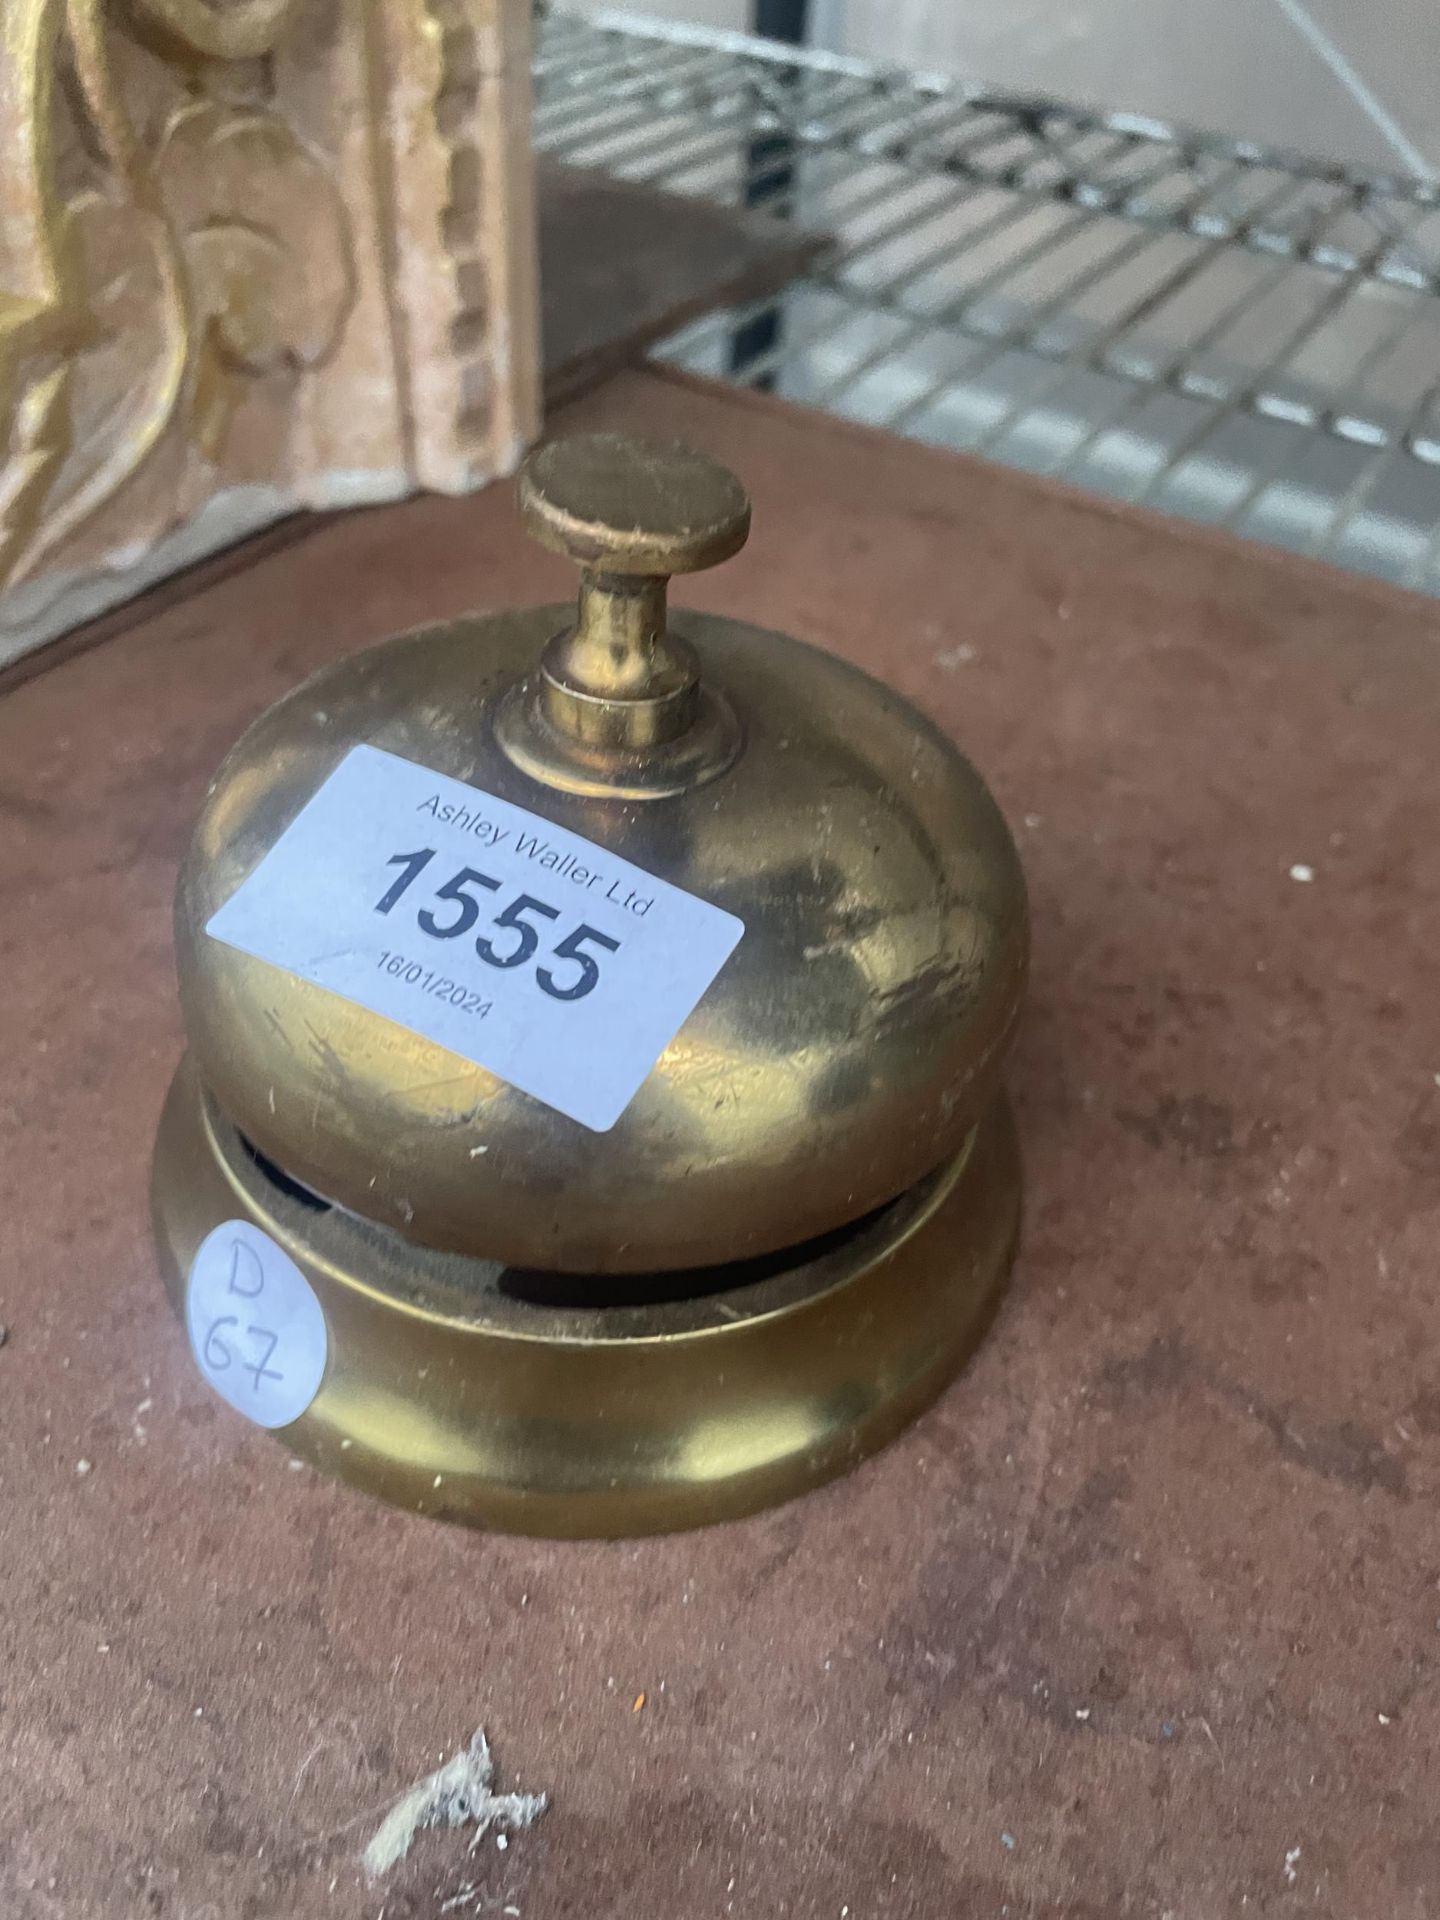 A SMALL VINTAGE BRASS RECEPTION BELL